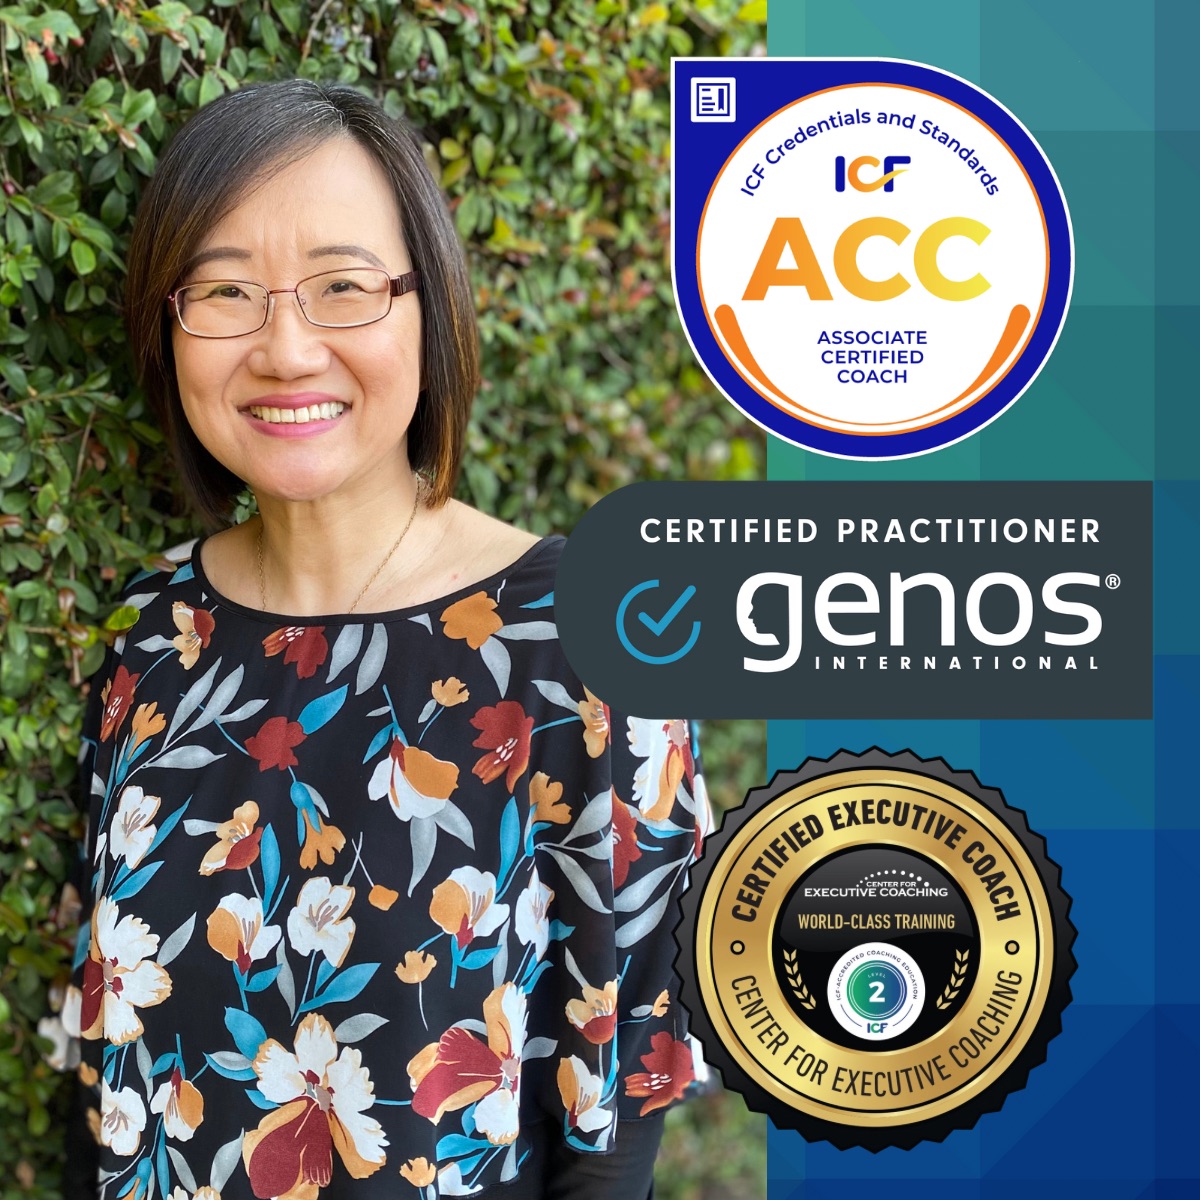 Asian woman in color blouse with short brown hair and red wire glasses. Certifications from the International Coaching Federation, Genos International and the Center for Executive Coaching